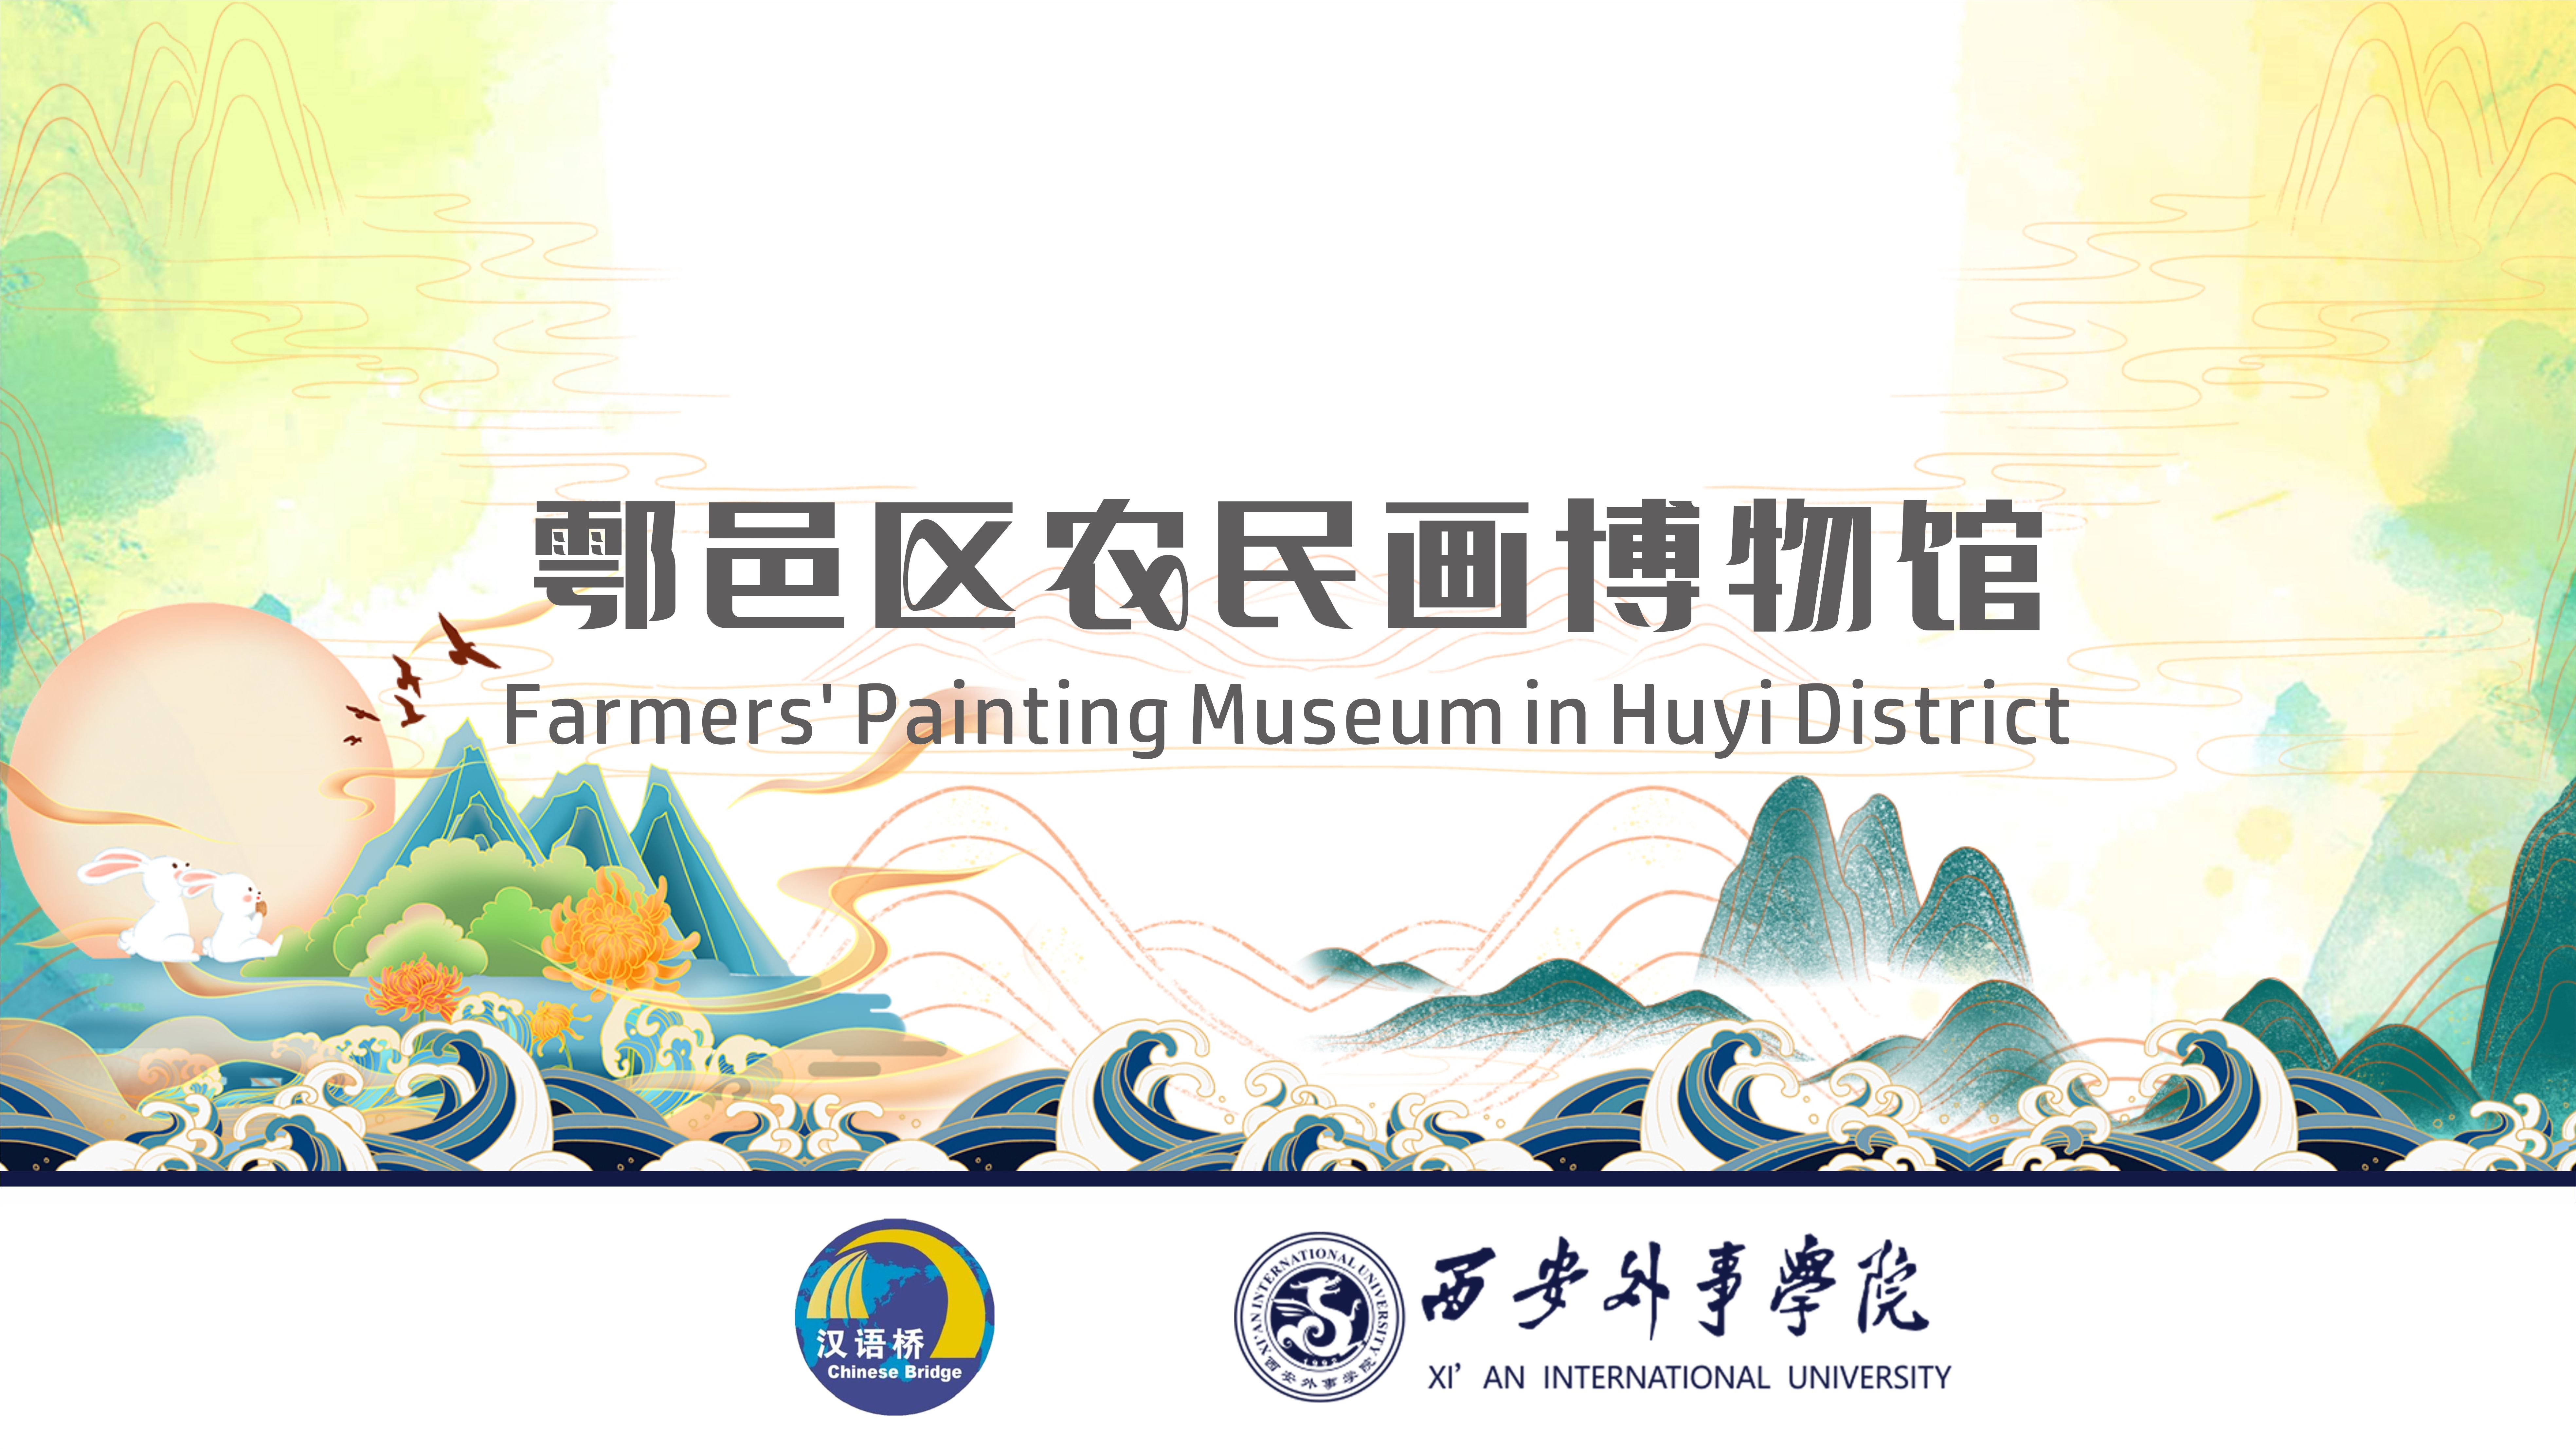 Farmers’ Painting Museum in Huyi District